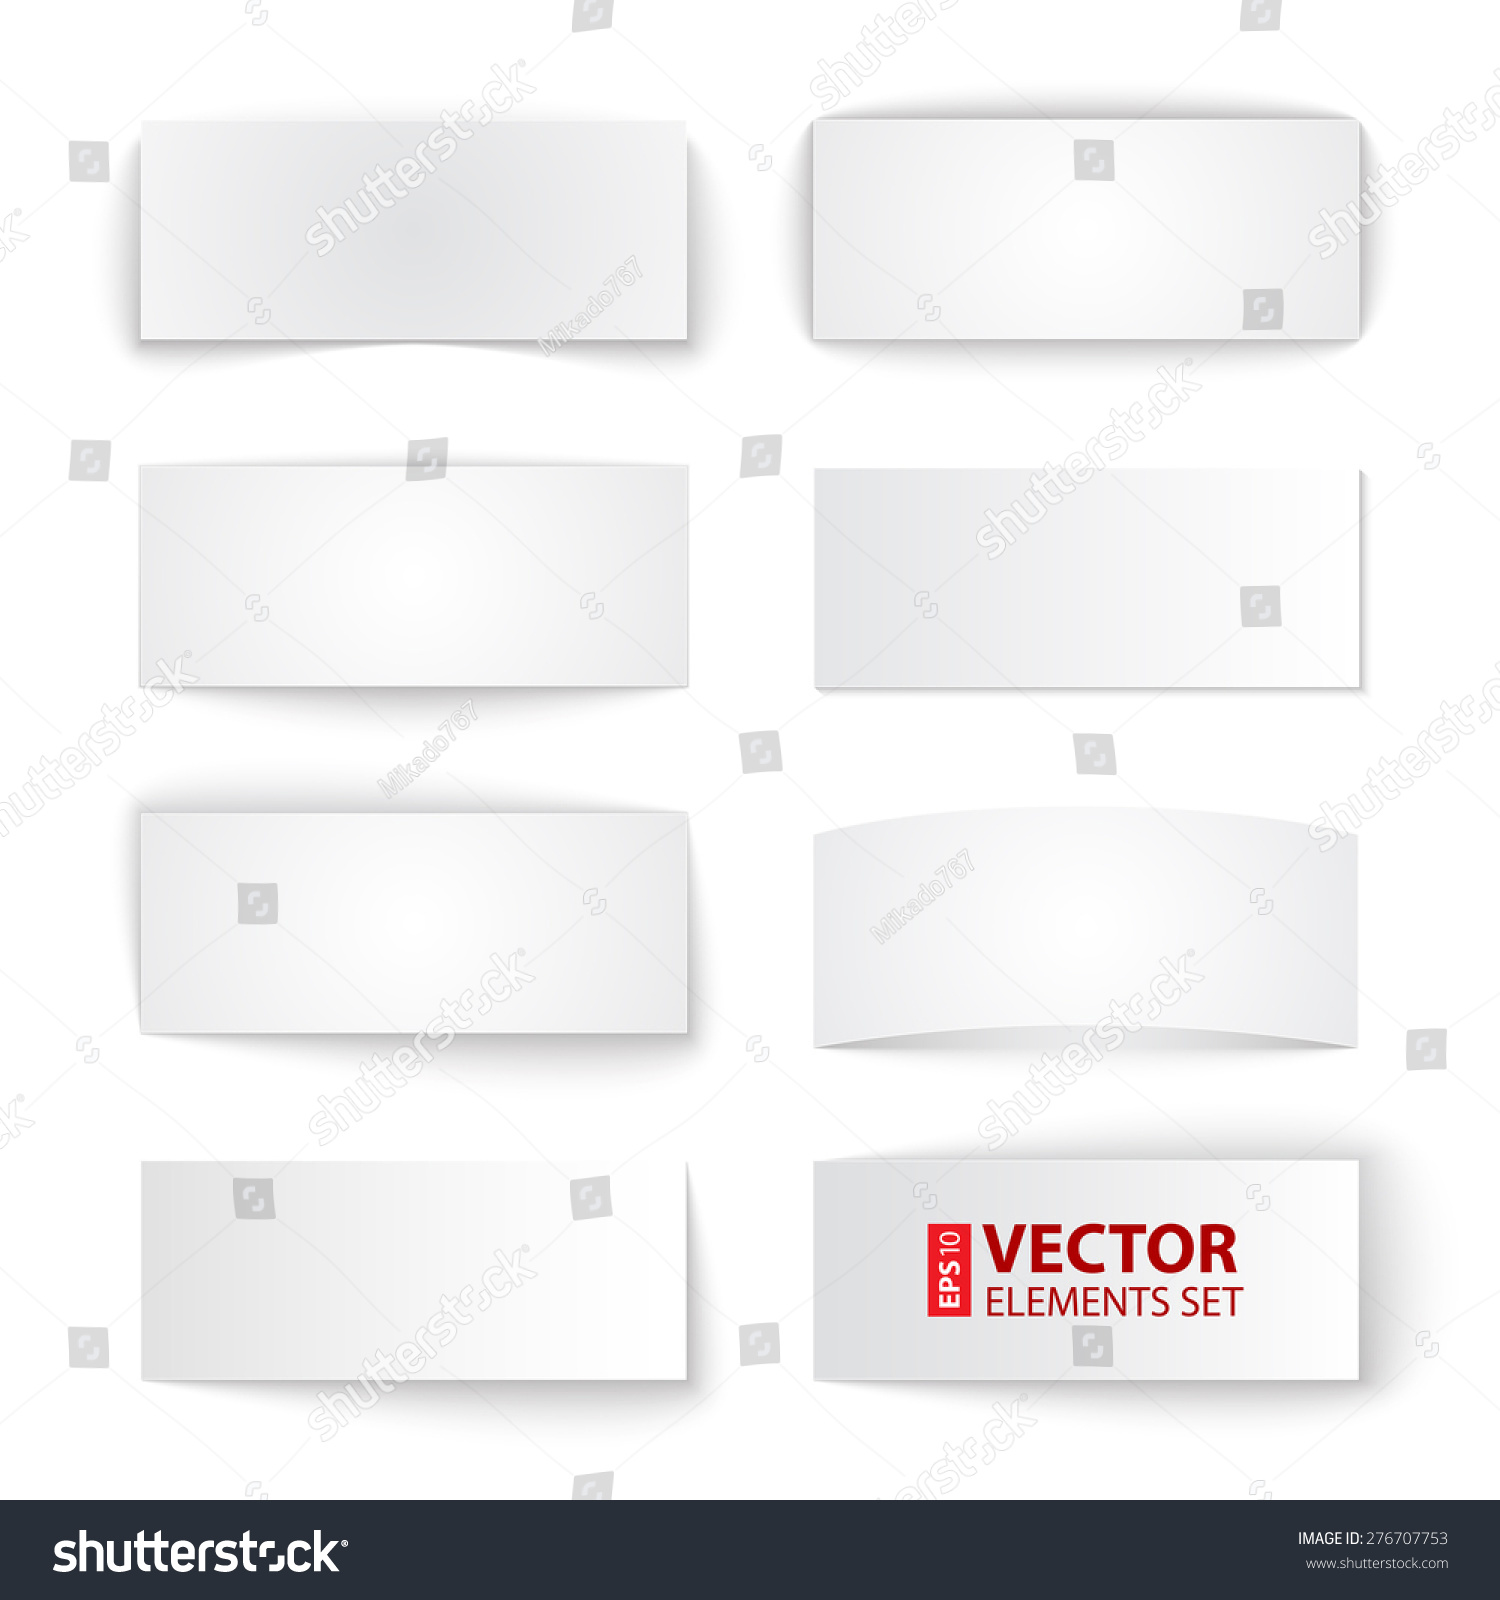 Set of isolated blank paper banners with transparent shadows on white background. RGB EPS 10 vector illustration #276707753